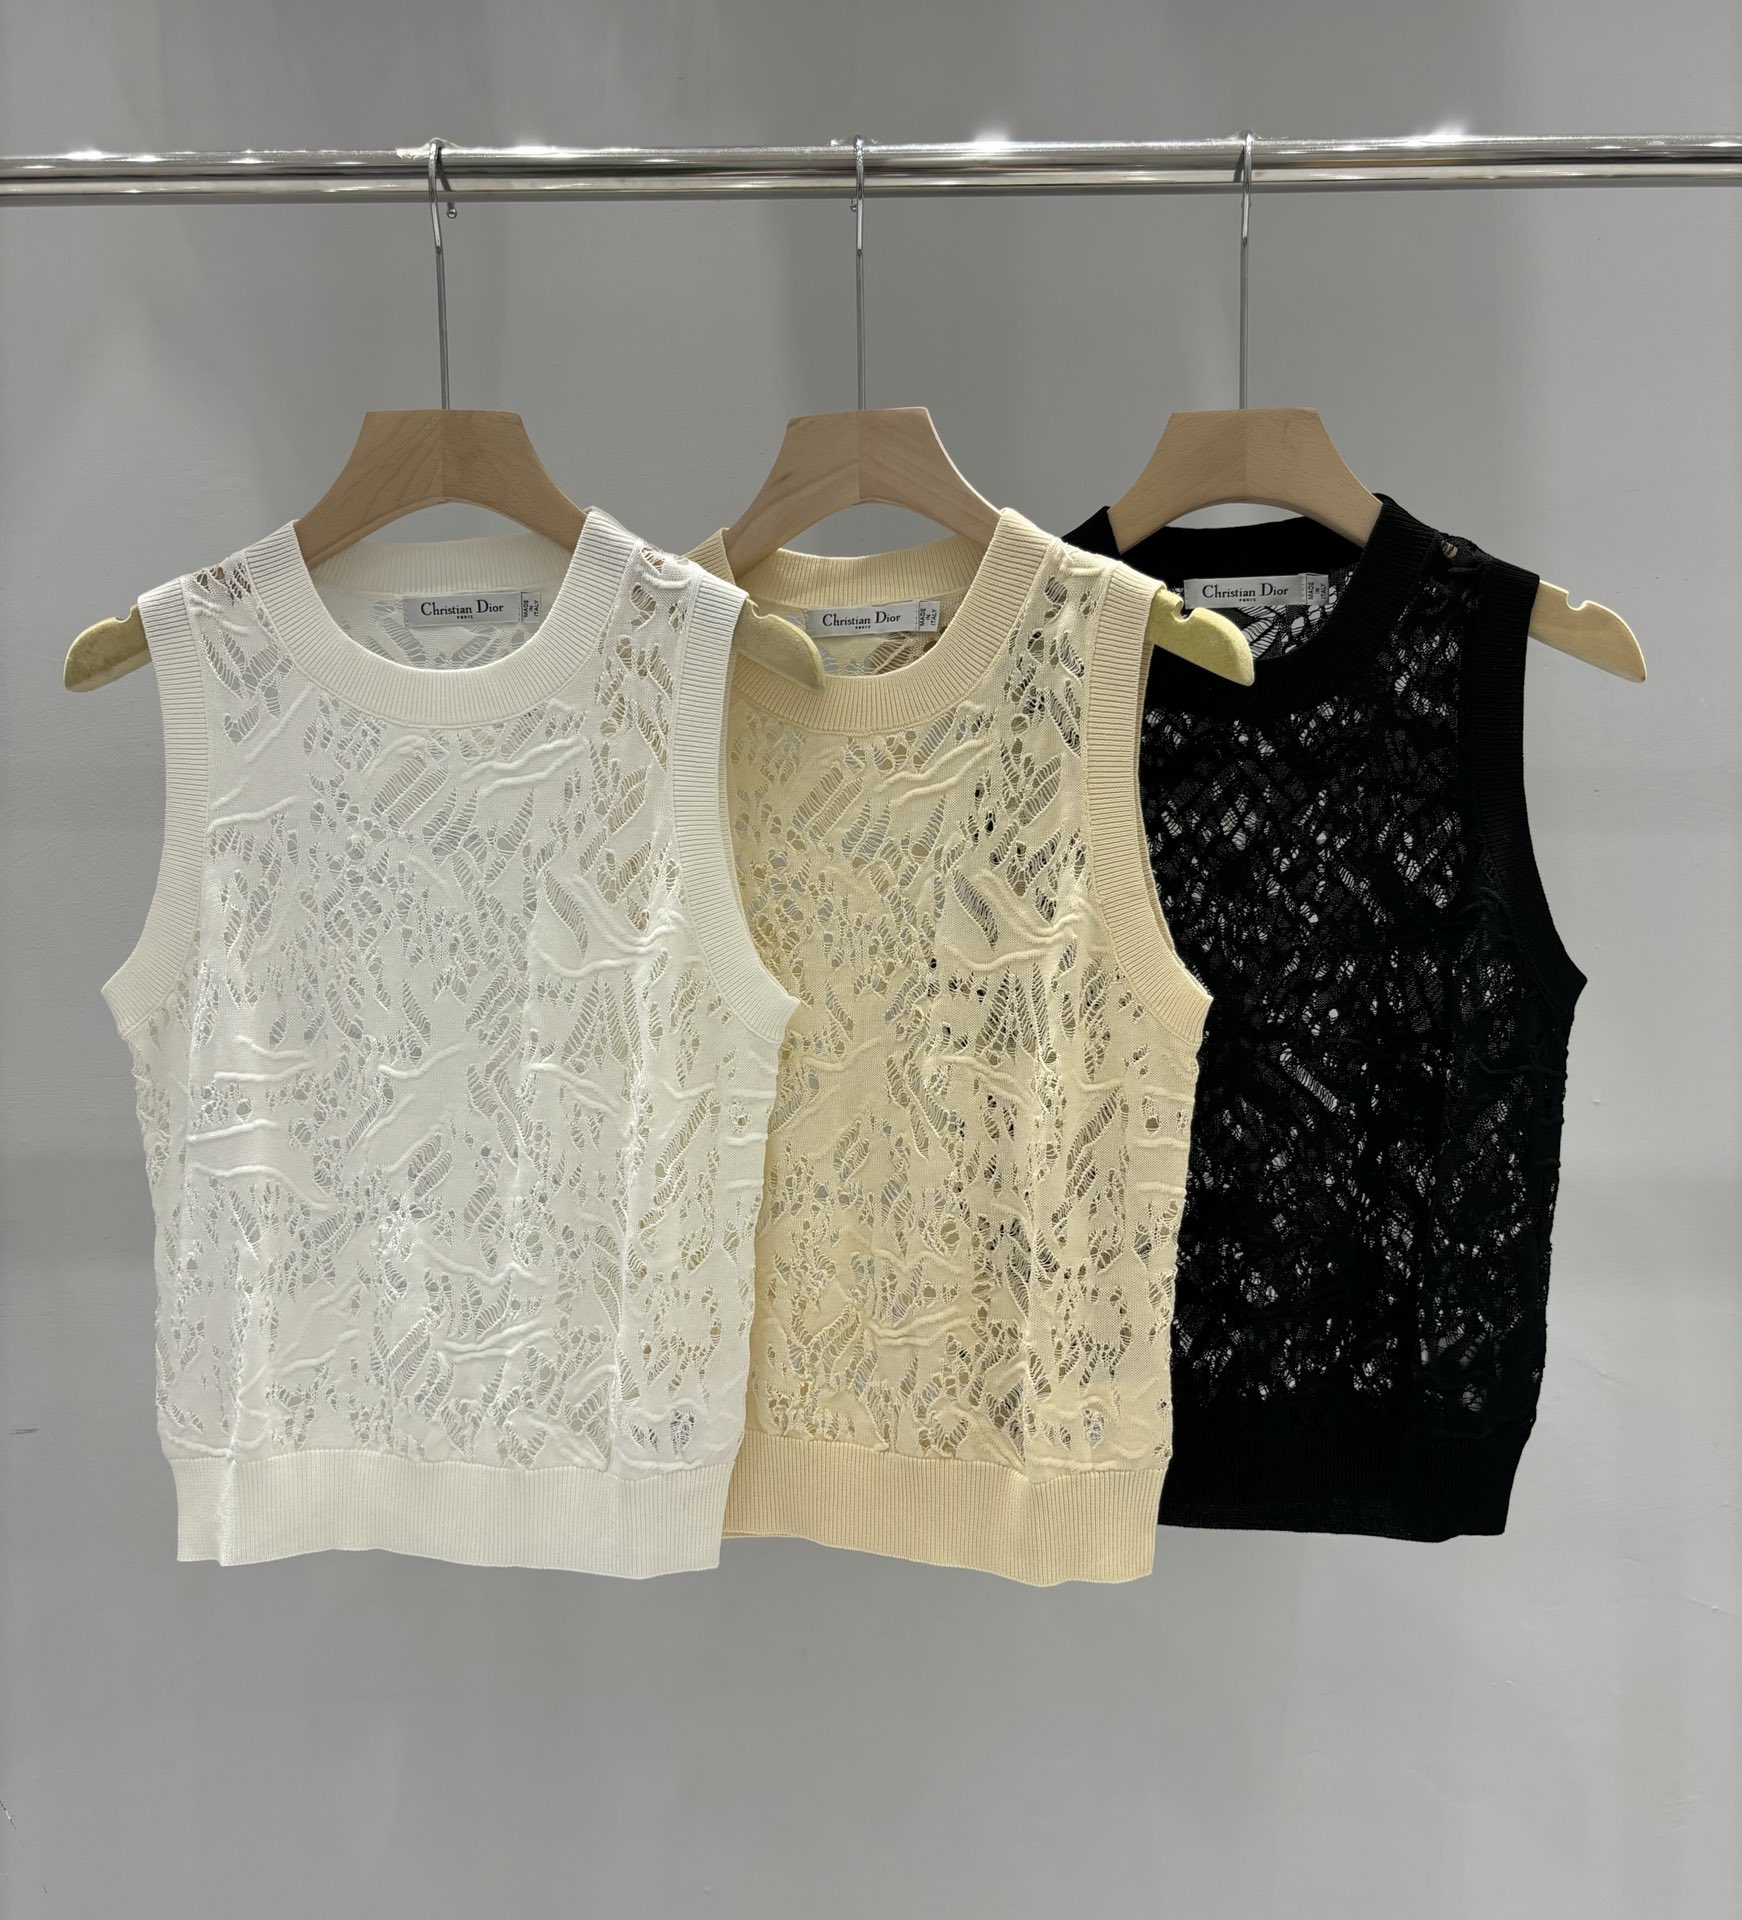 Dior Copy
 Clothing Tank Tops&Camis Openwork Knitting Fall Collection